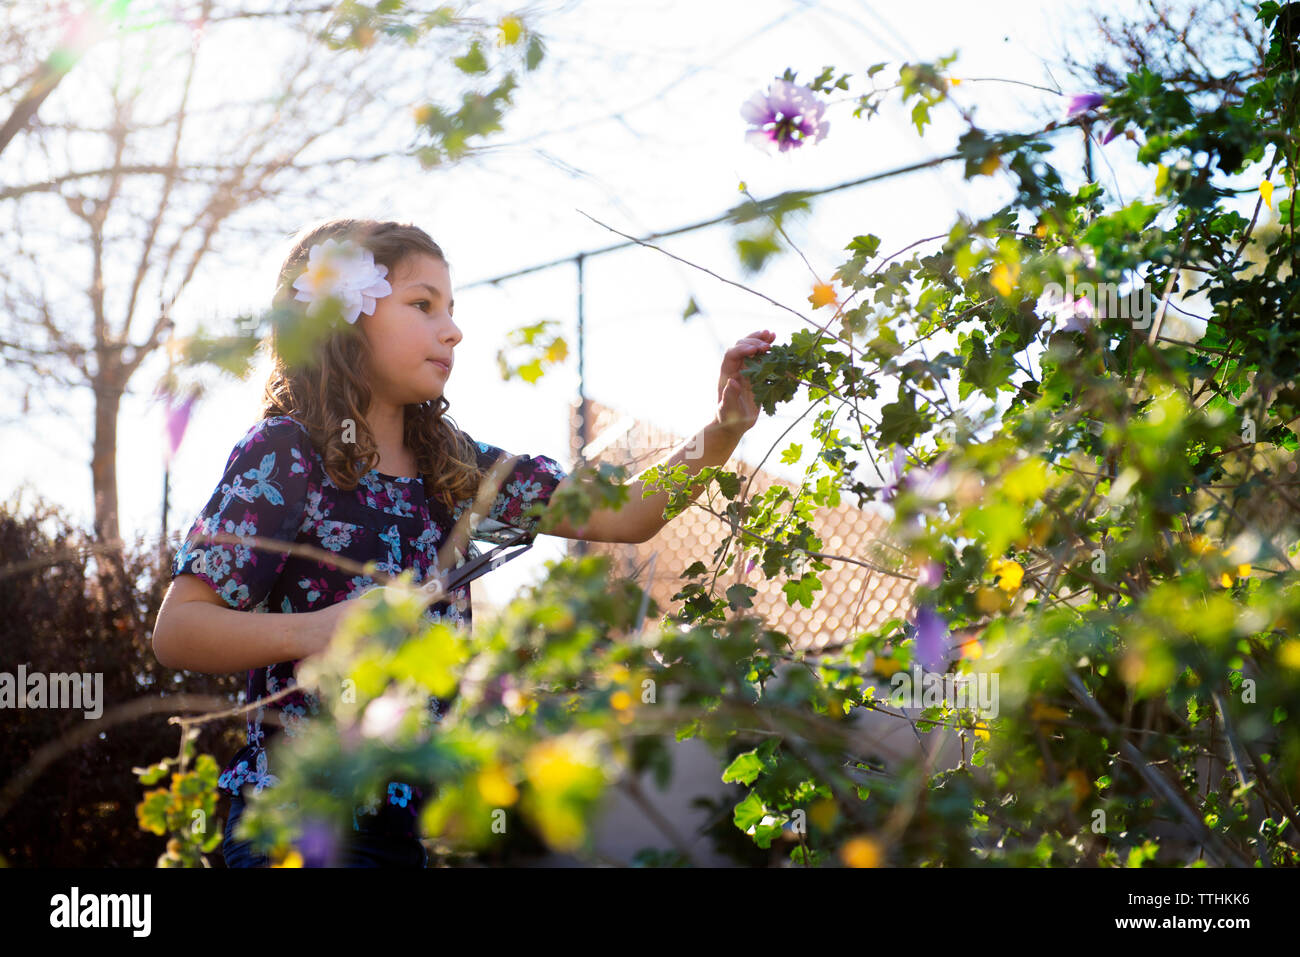 Low angle view of girl touching plants against sky Stock Photo